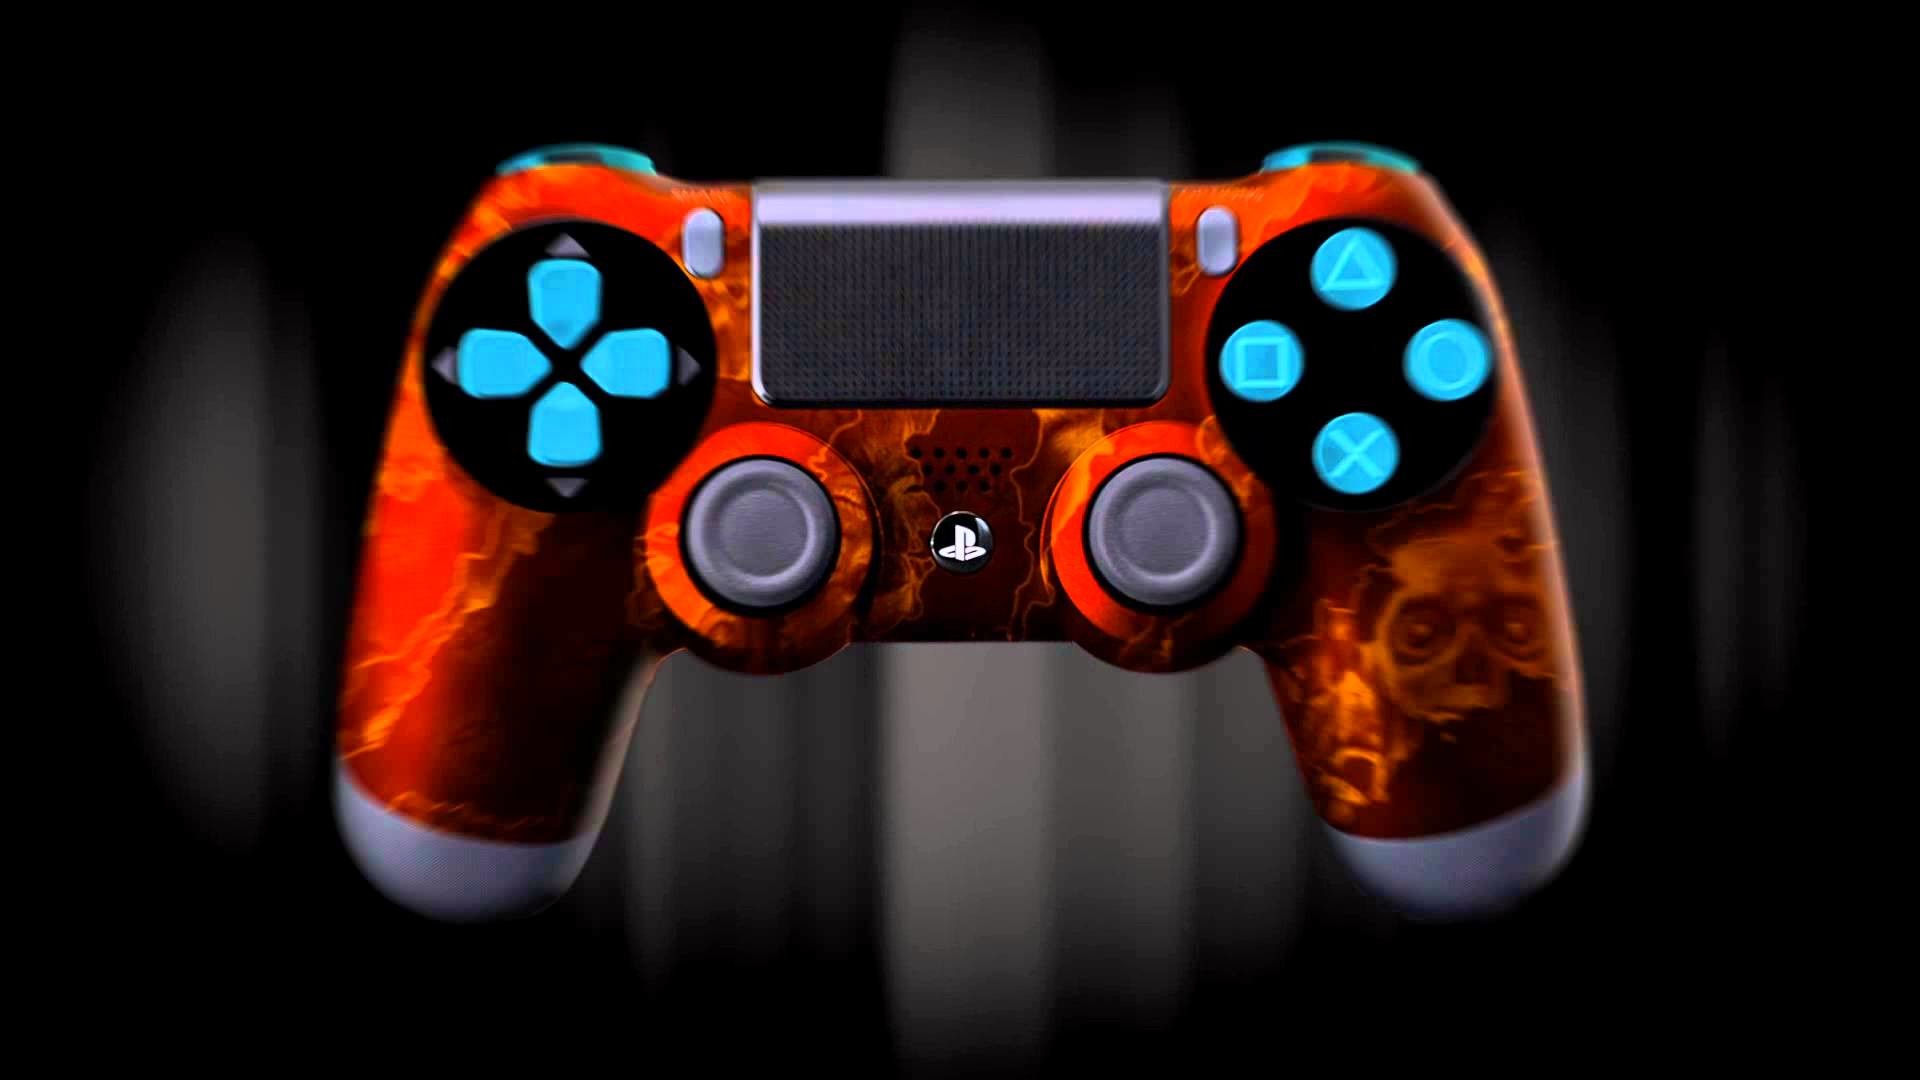 1920x1080 Custom PlayStation 4 Controllers - Presented by Evil Controllers